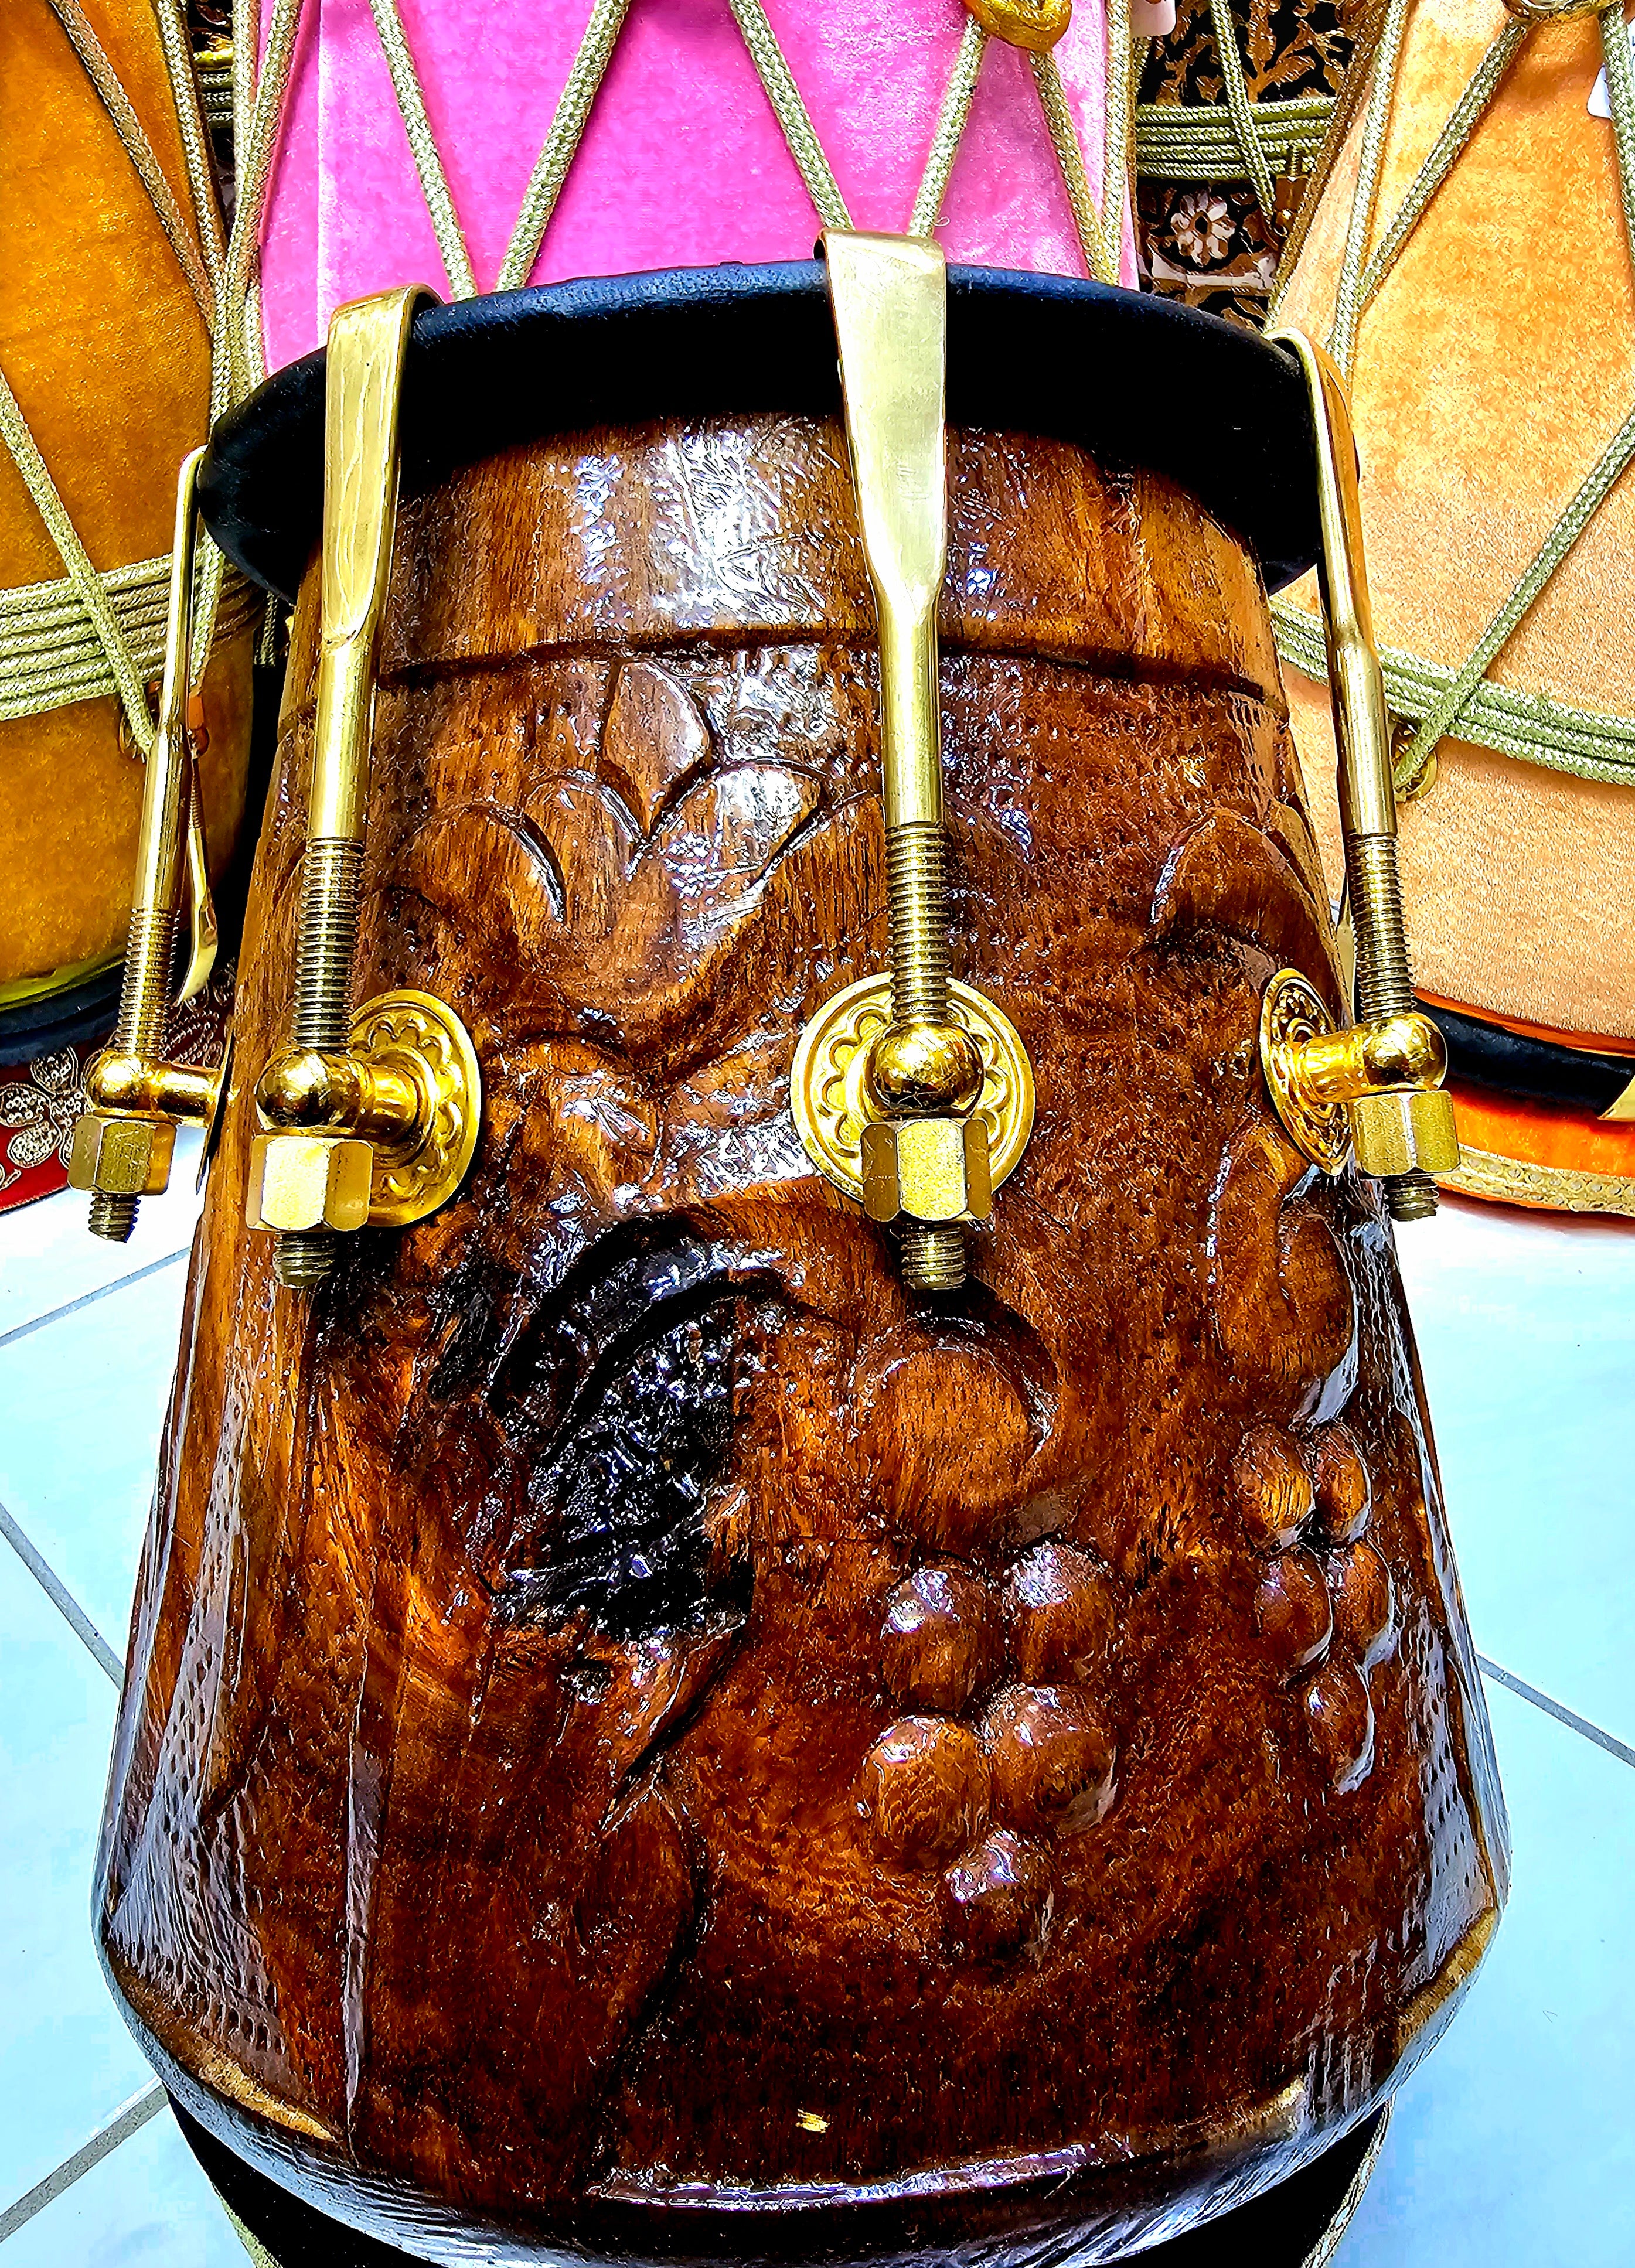 Golden Echoes: 11.25" tall, 6.5" Red Sheesham Half-Dholak with Black Skin and Golden Pure Brass Bolts